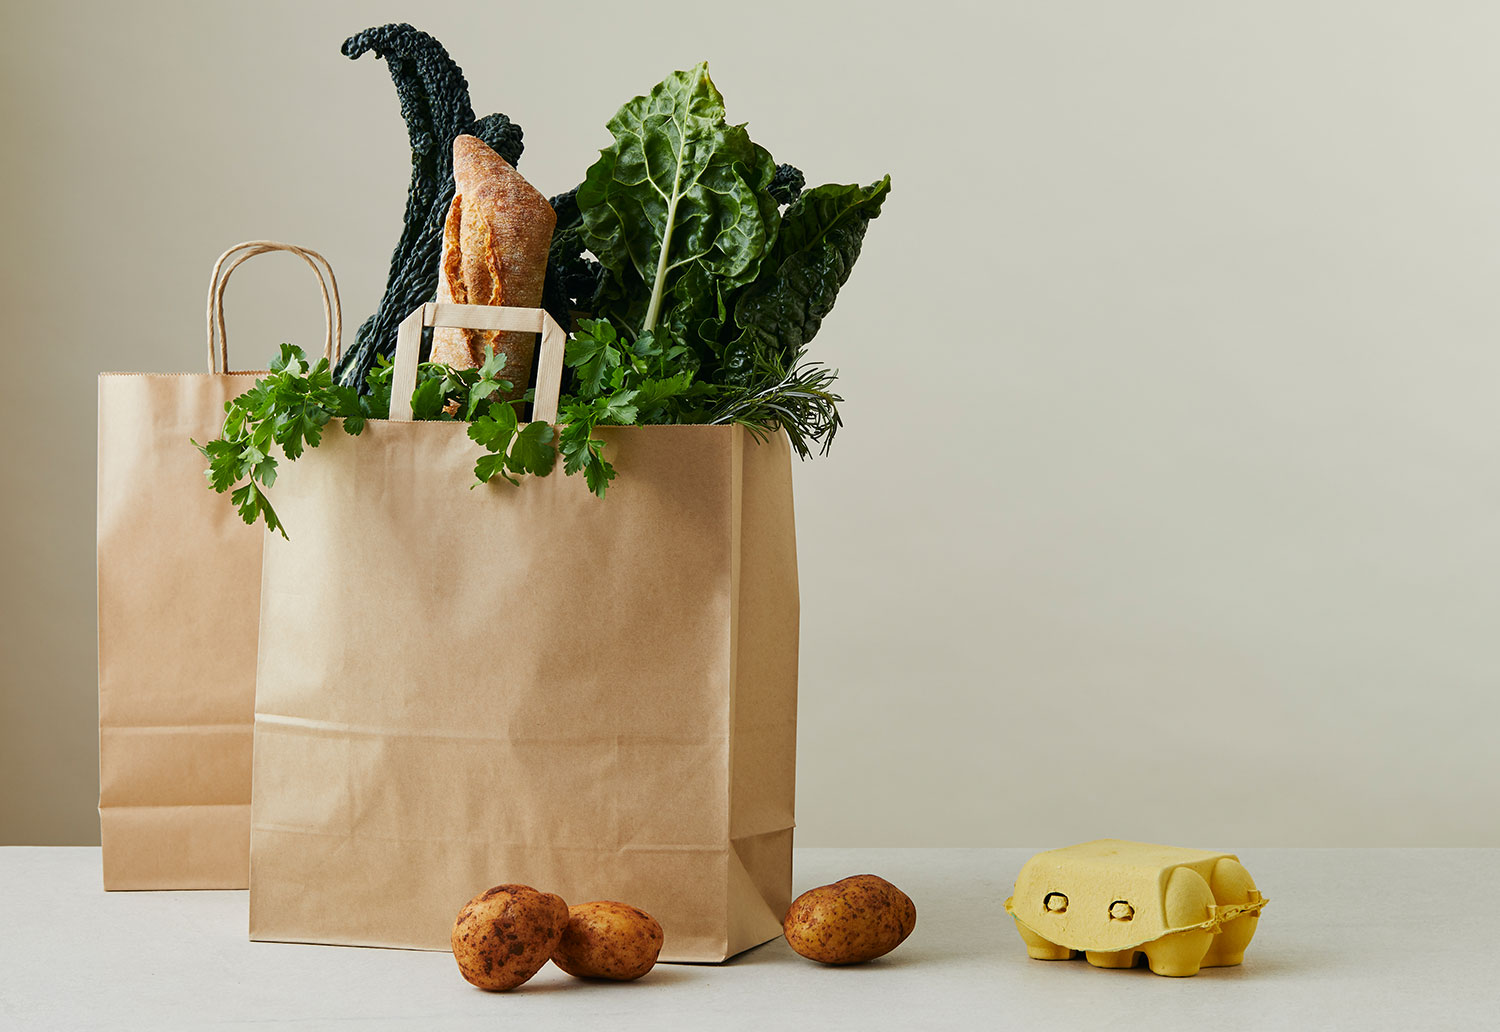 Six things to consider when choosing a paper bag